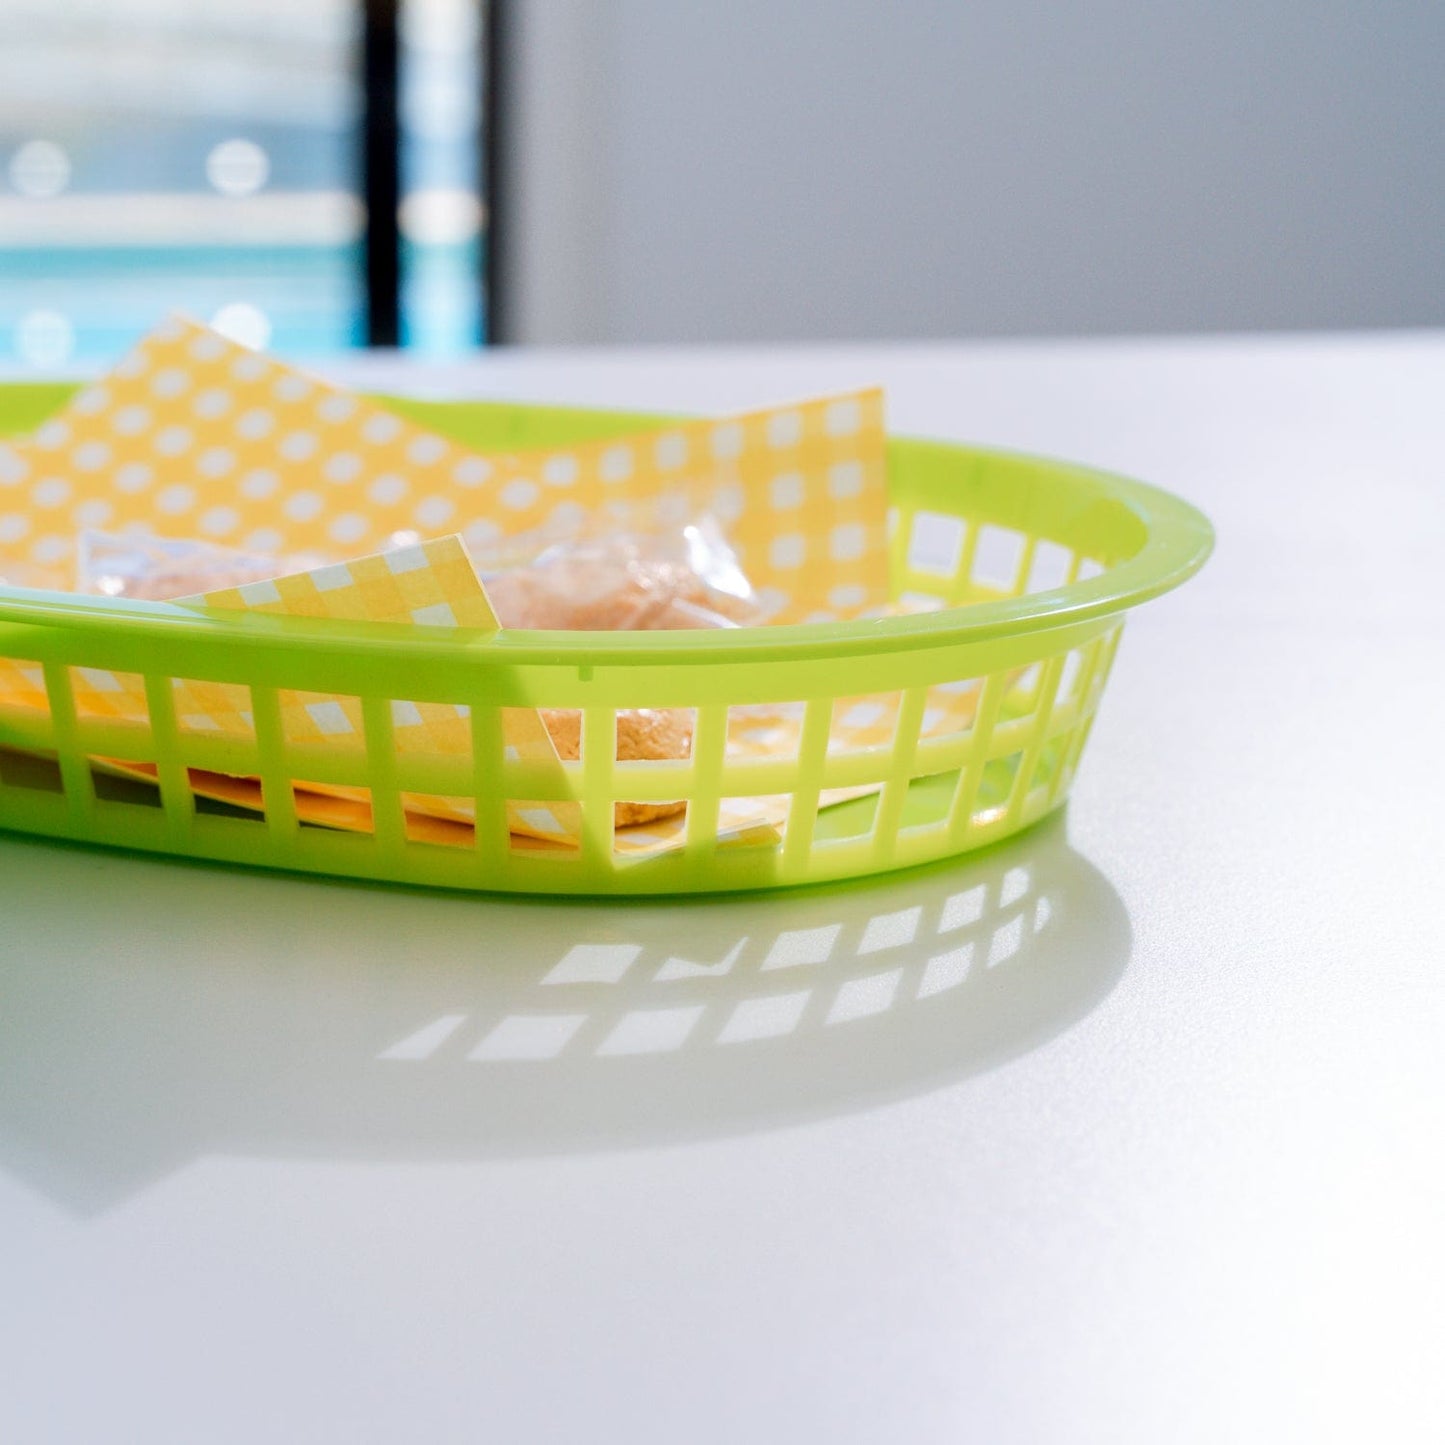 COOK EASY Oval plastic snack basket Cook Easy Set of 3 Oval Plastic Snack Baskets